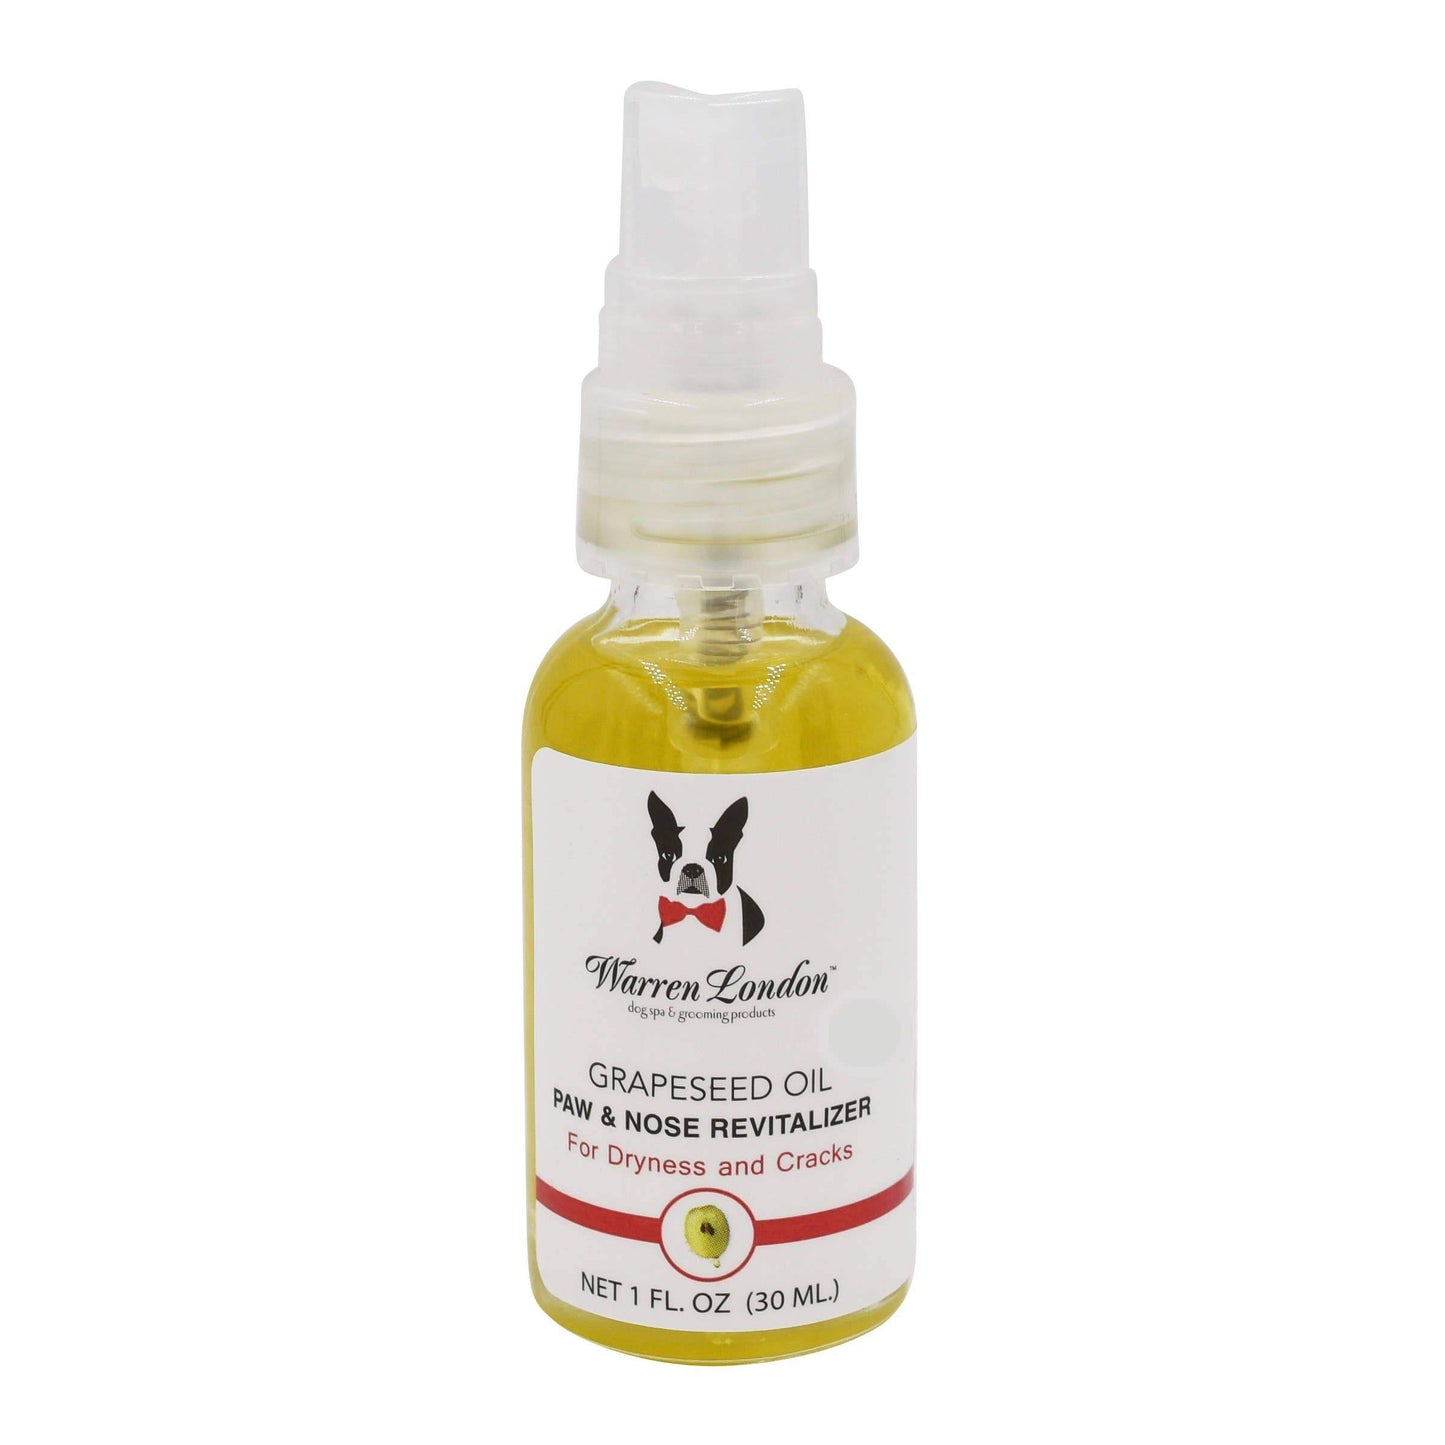 Warren London Grapeseed Oil Paw Revitalizer for Dogs  Image